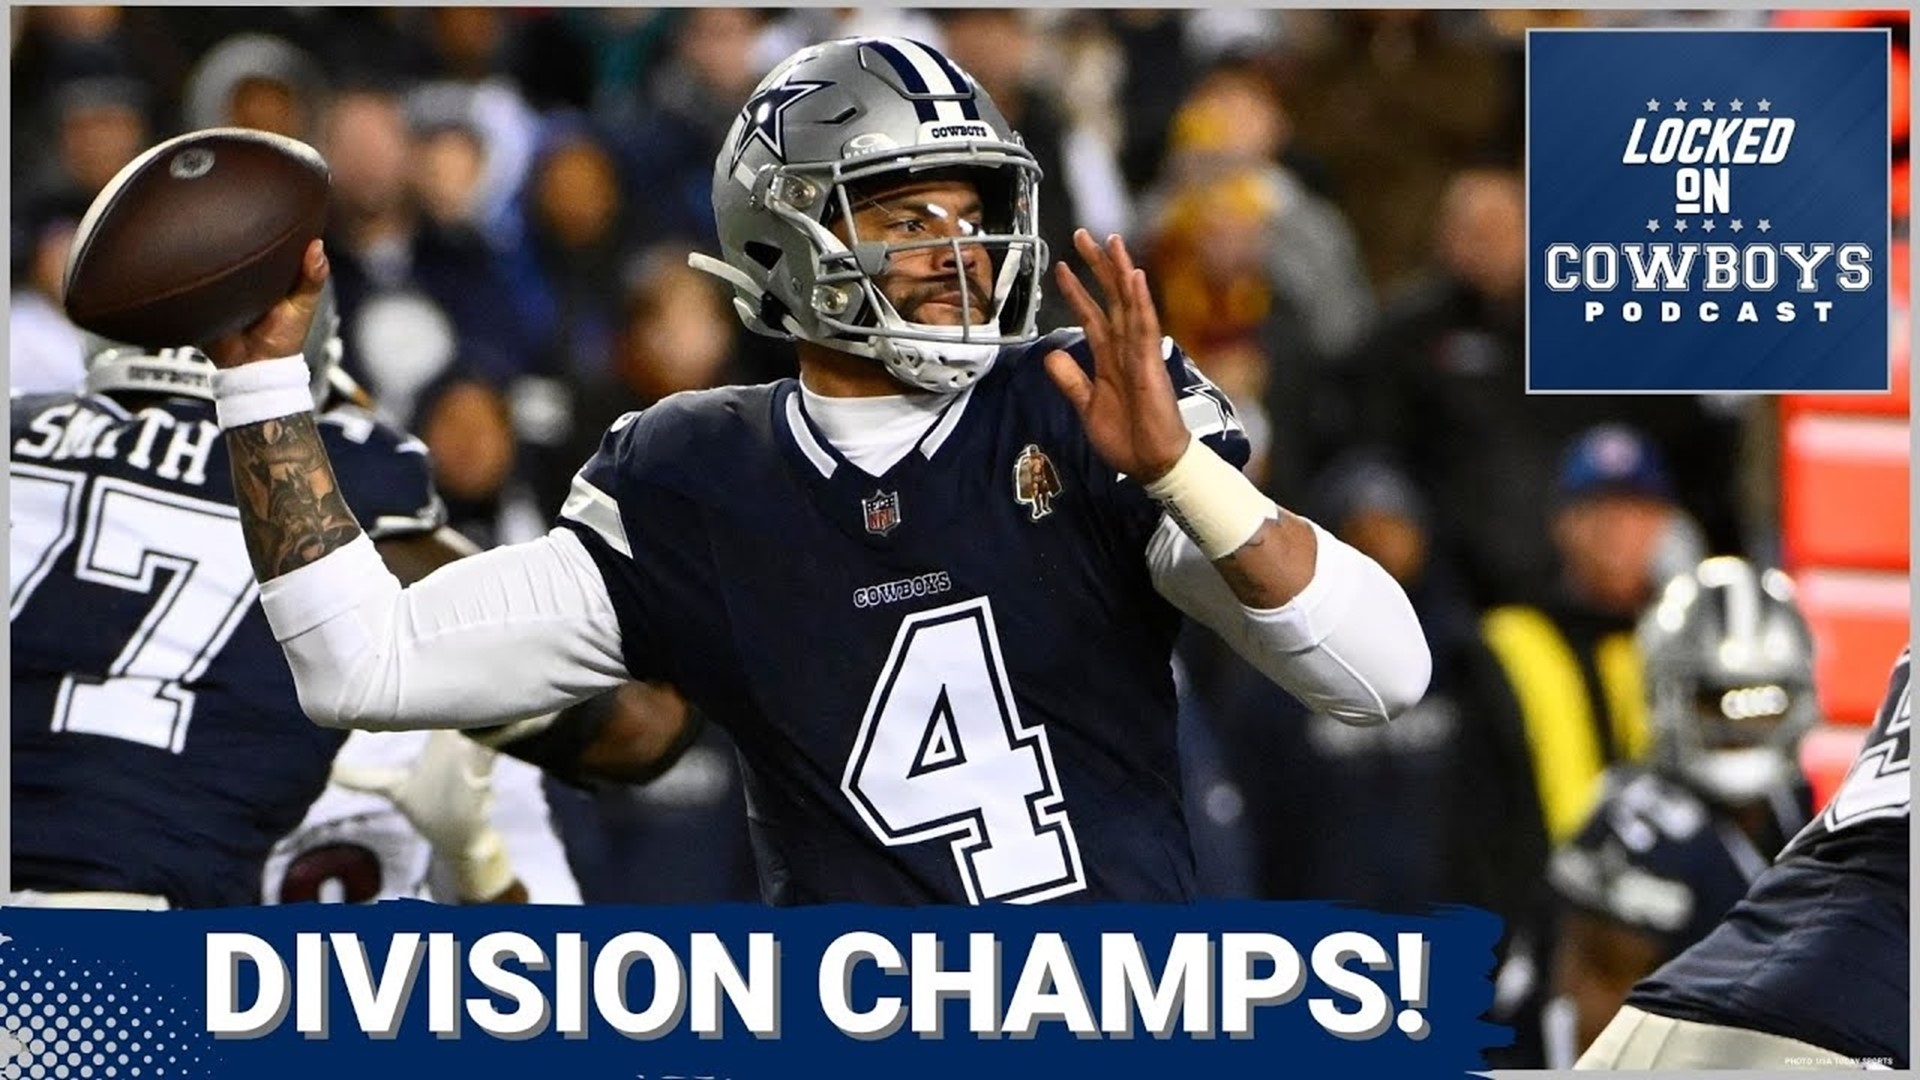 The Dallas Cowboys have won the NFC East after defeating the Washington Commanders in Week 18.